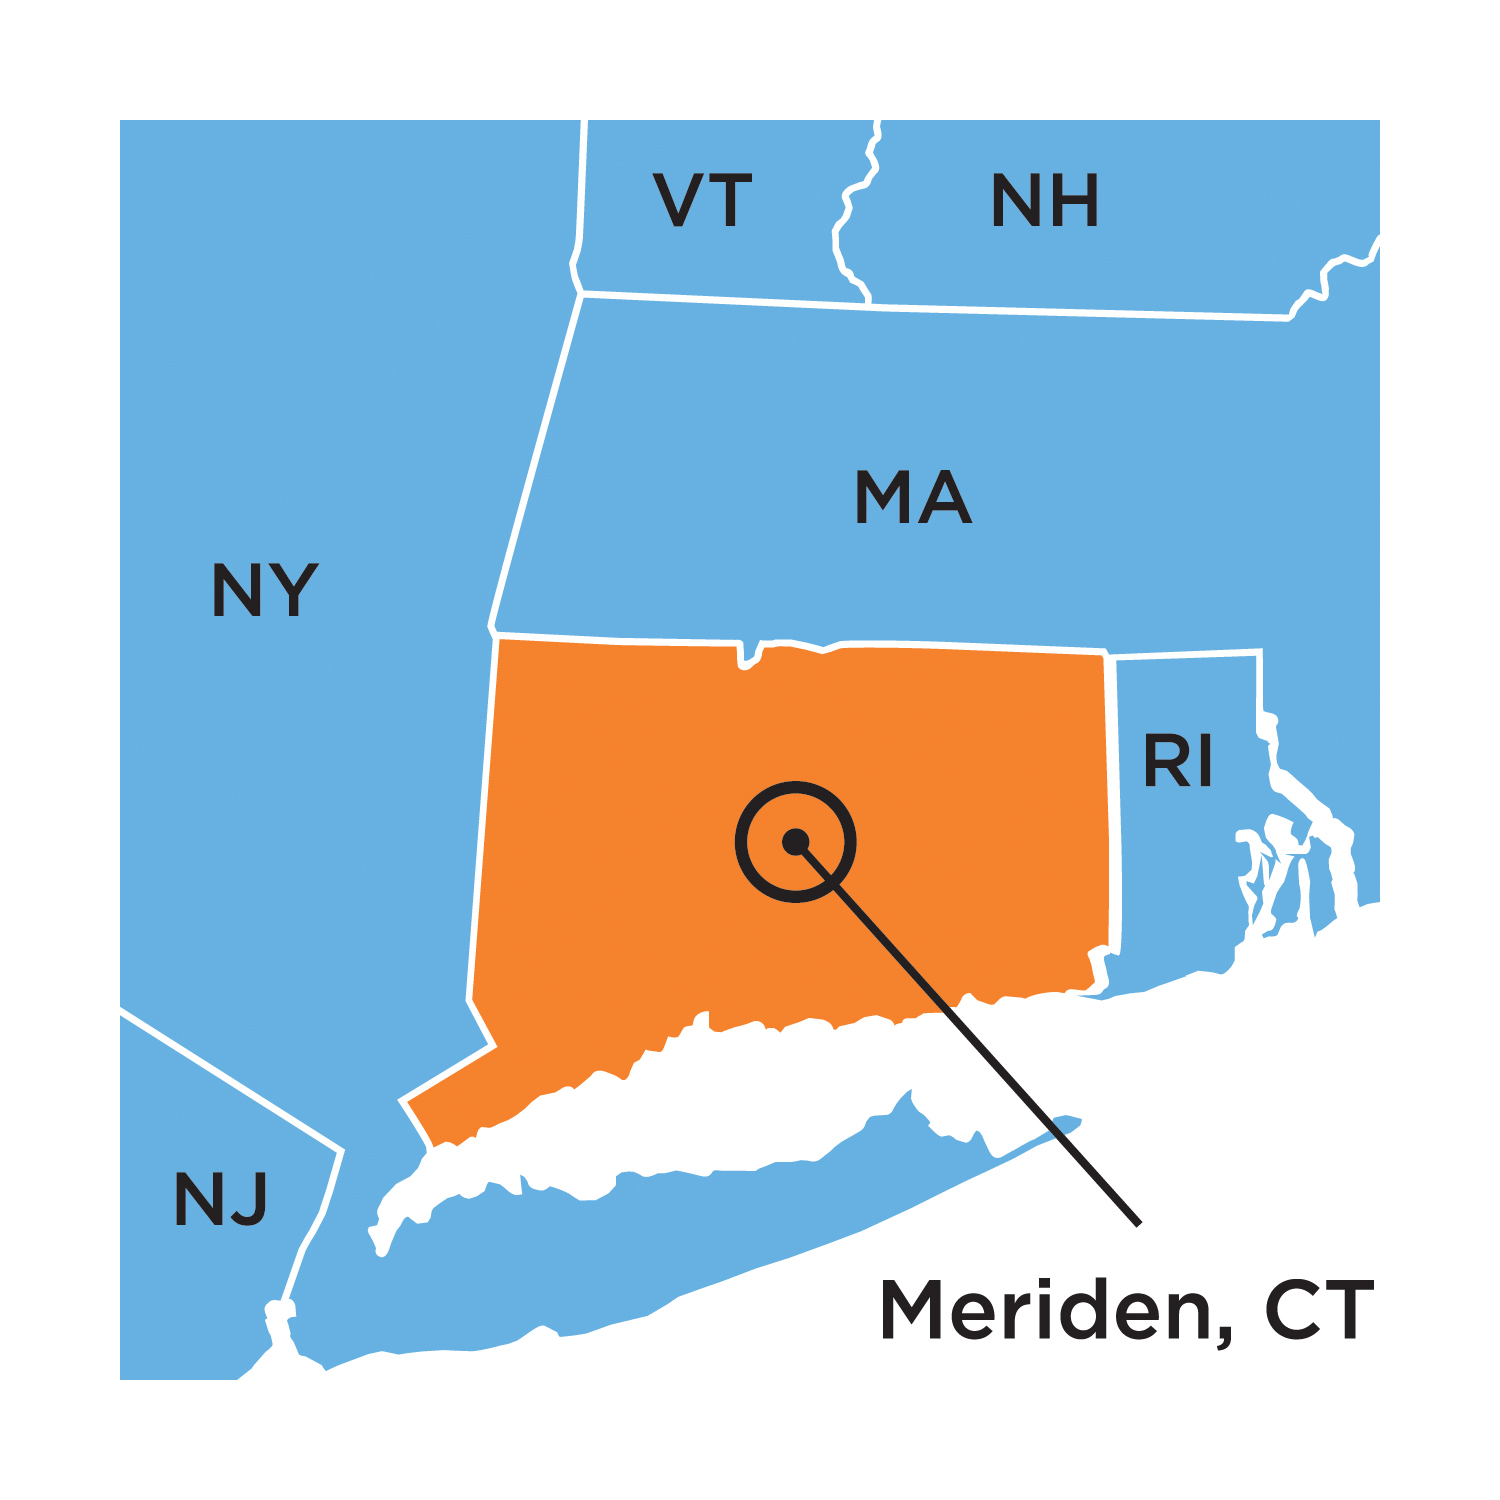 Meriden's location in the state of CT